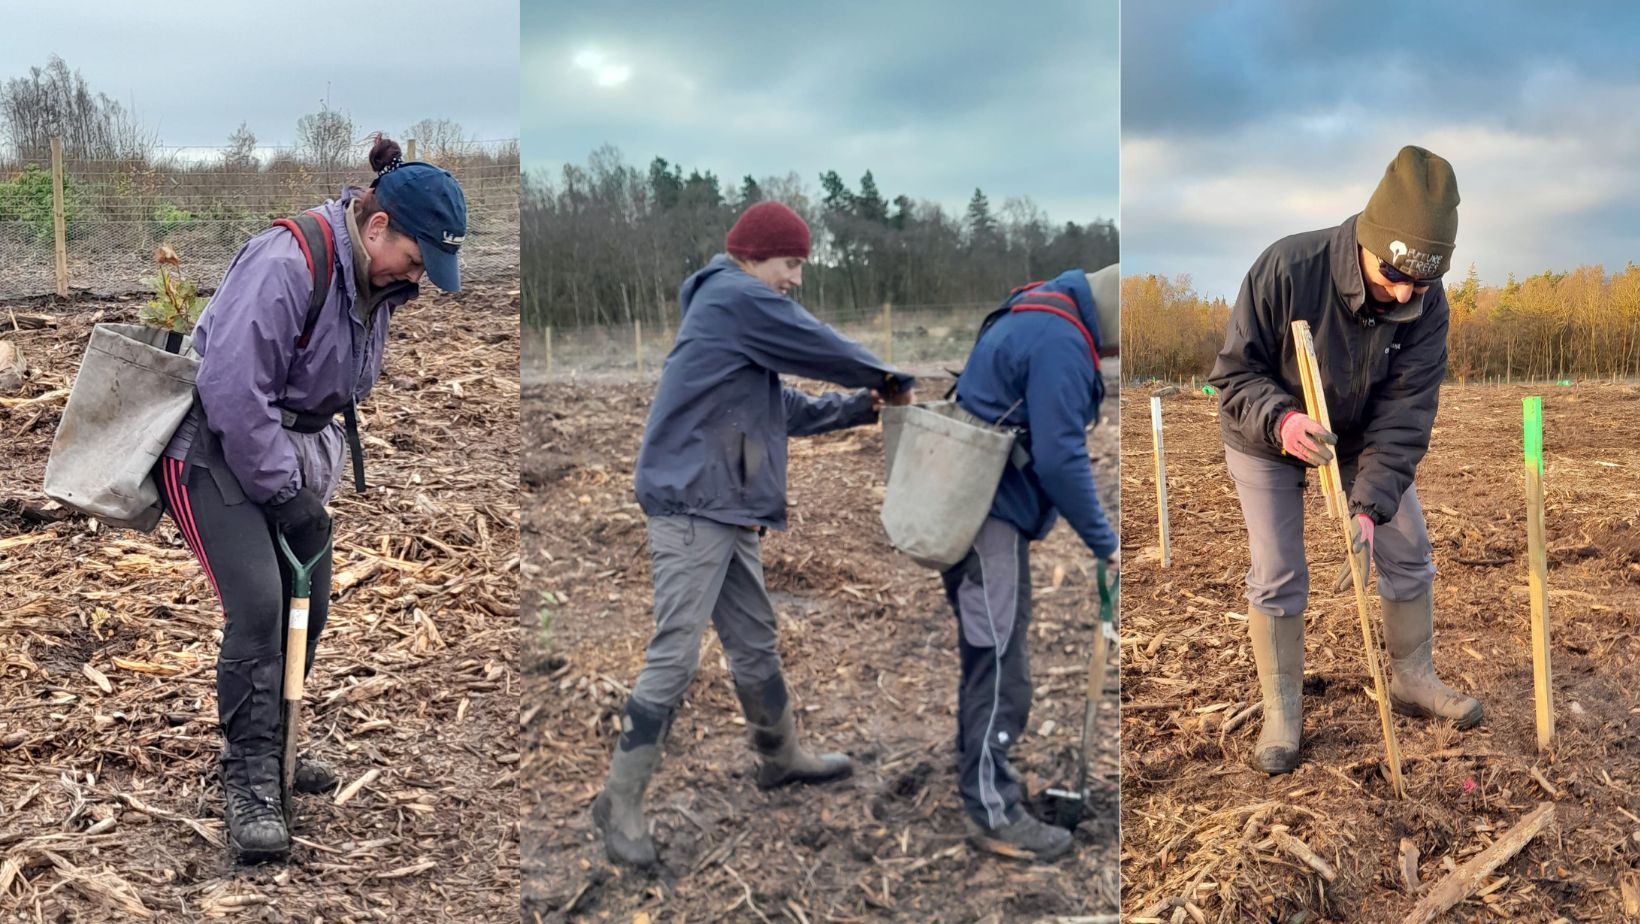 Images: Planting trials and measuring tree height for baseline data